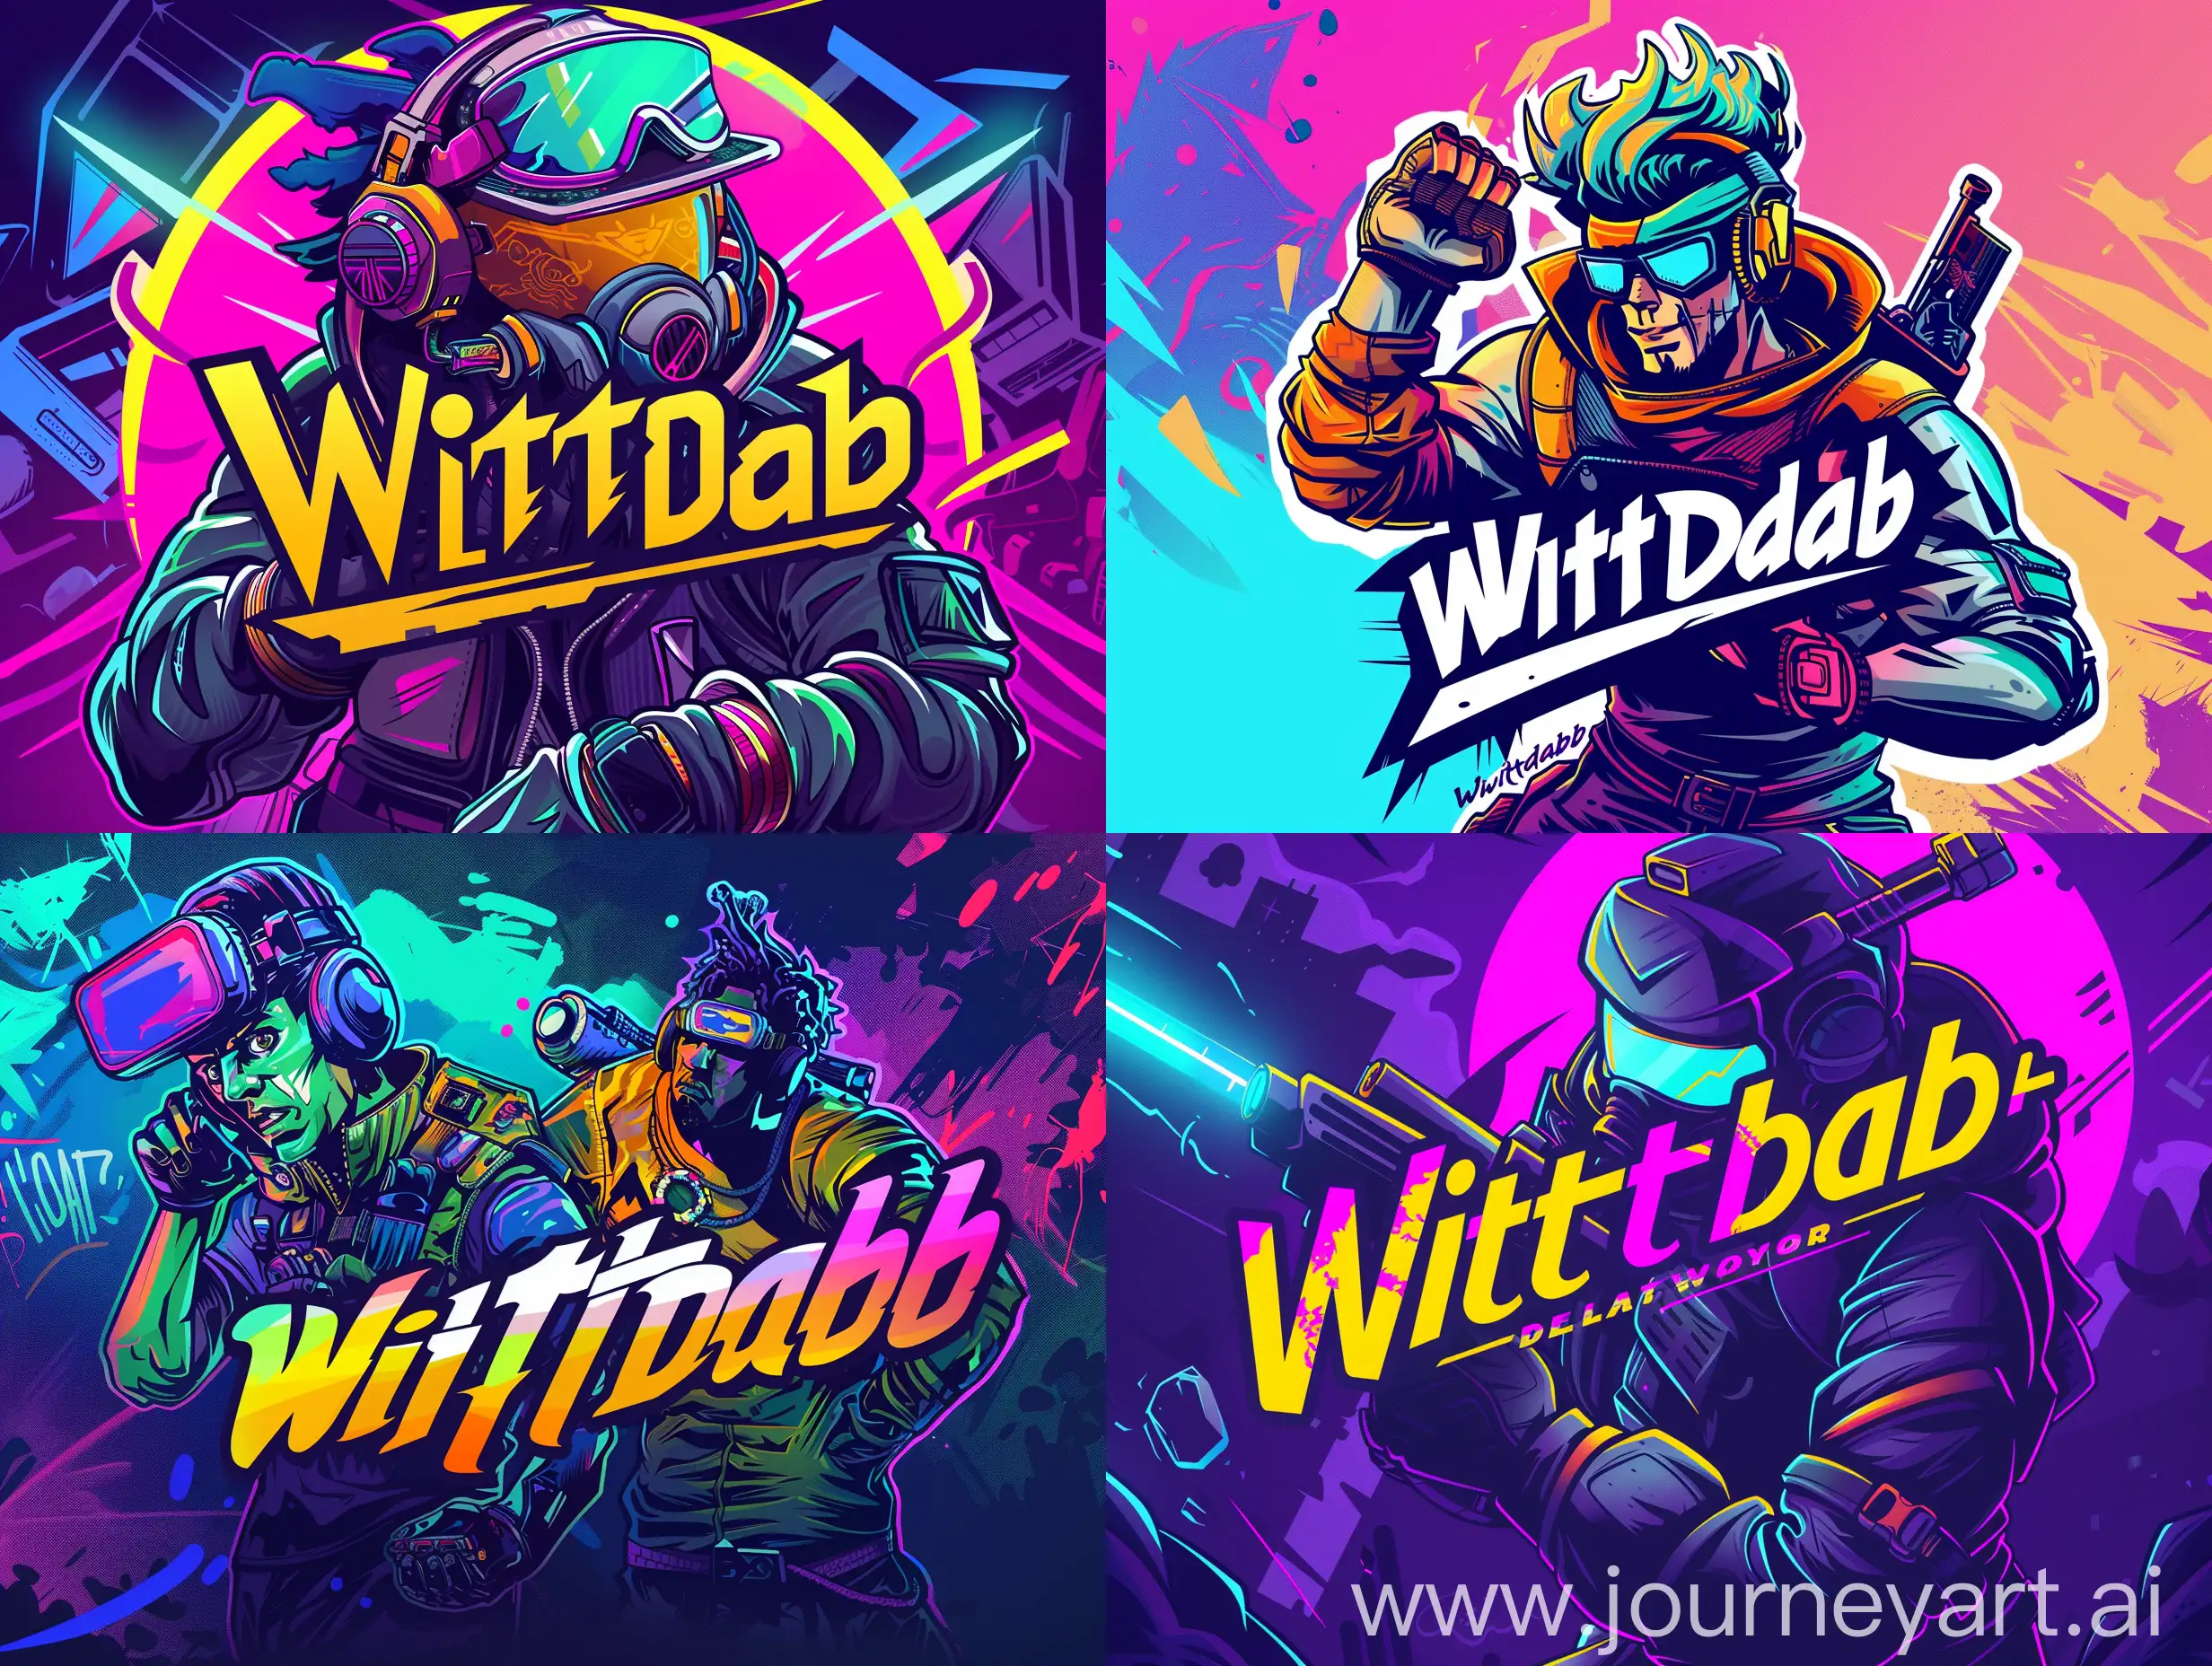 make me a group logo that is vibrant and professional with a text that says "WittyDab", it's a group that creates videogames